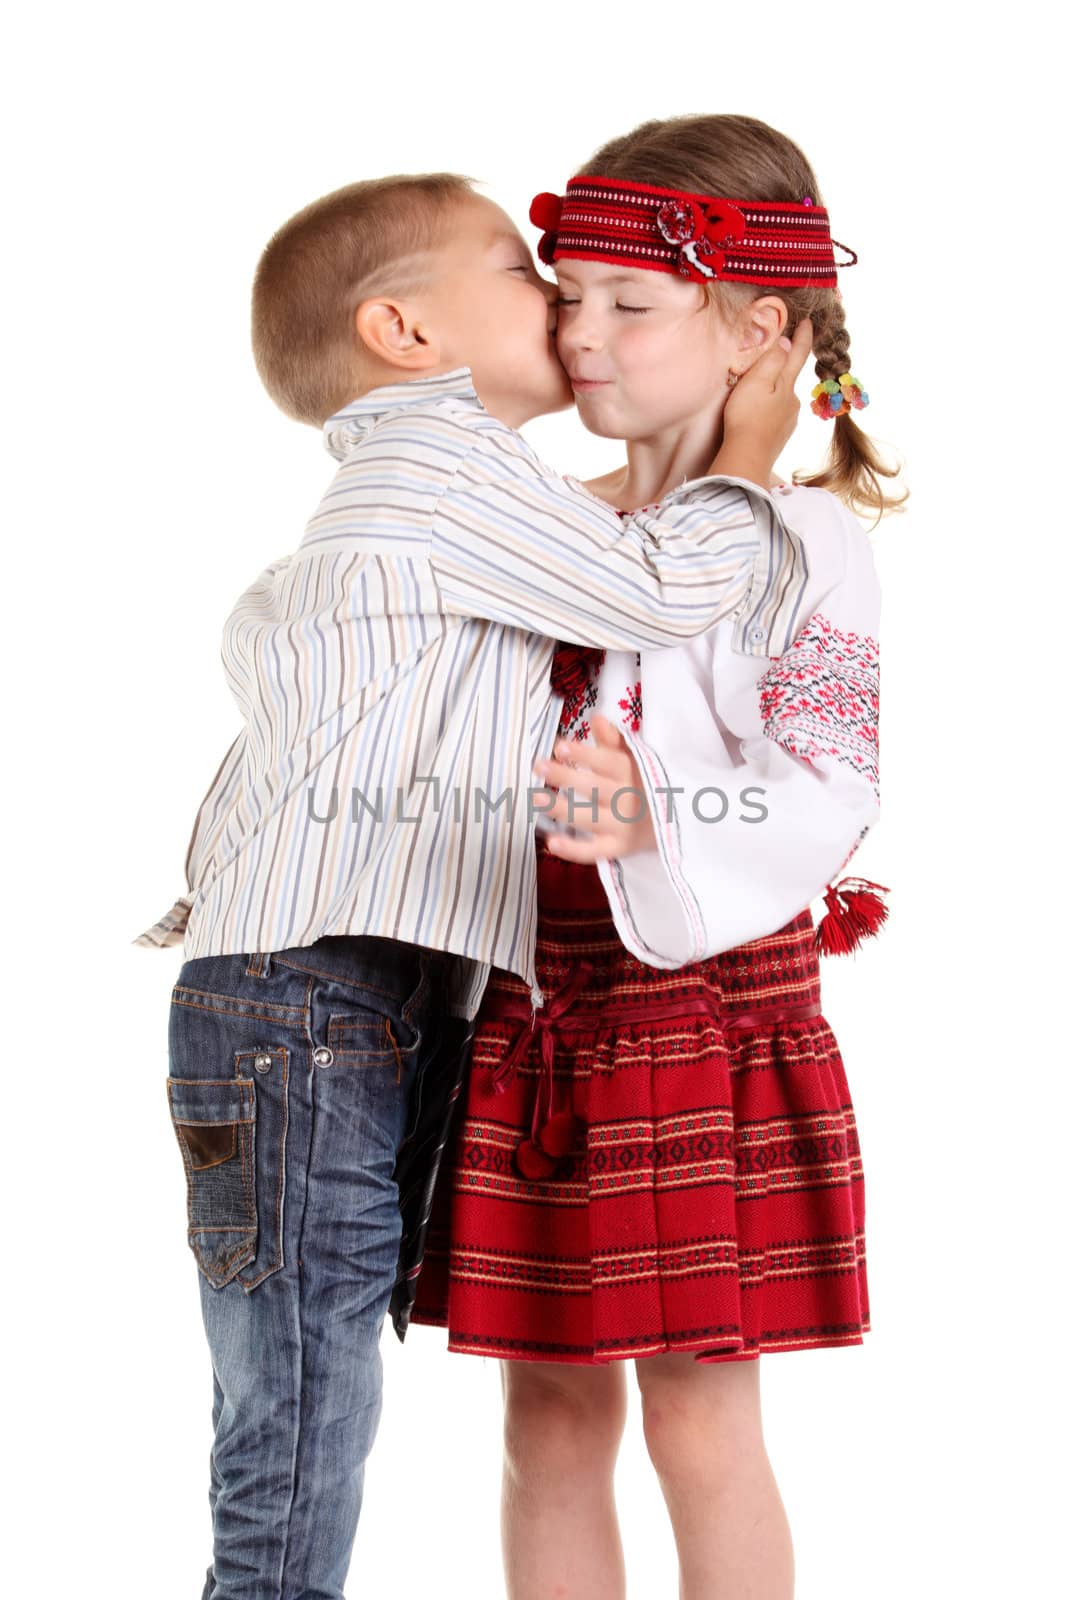 Little boy kissing a little girl on the white background
